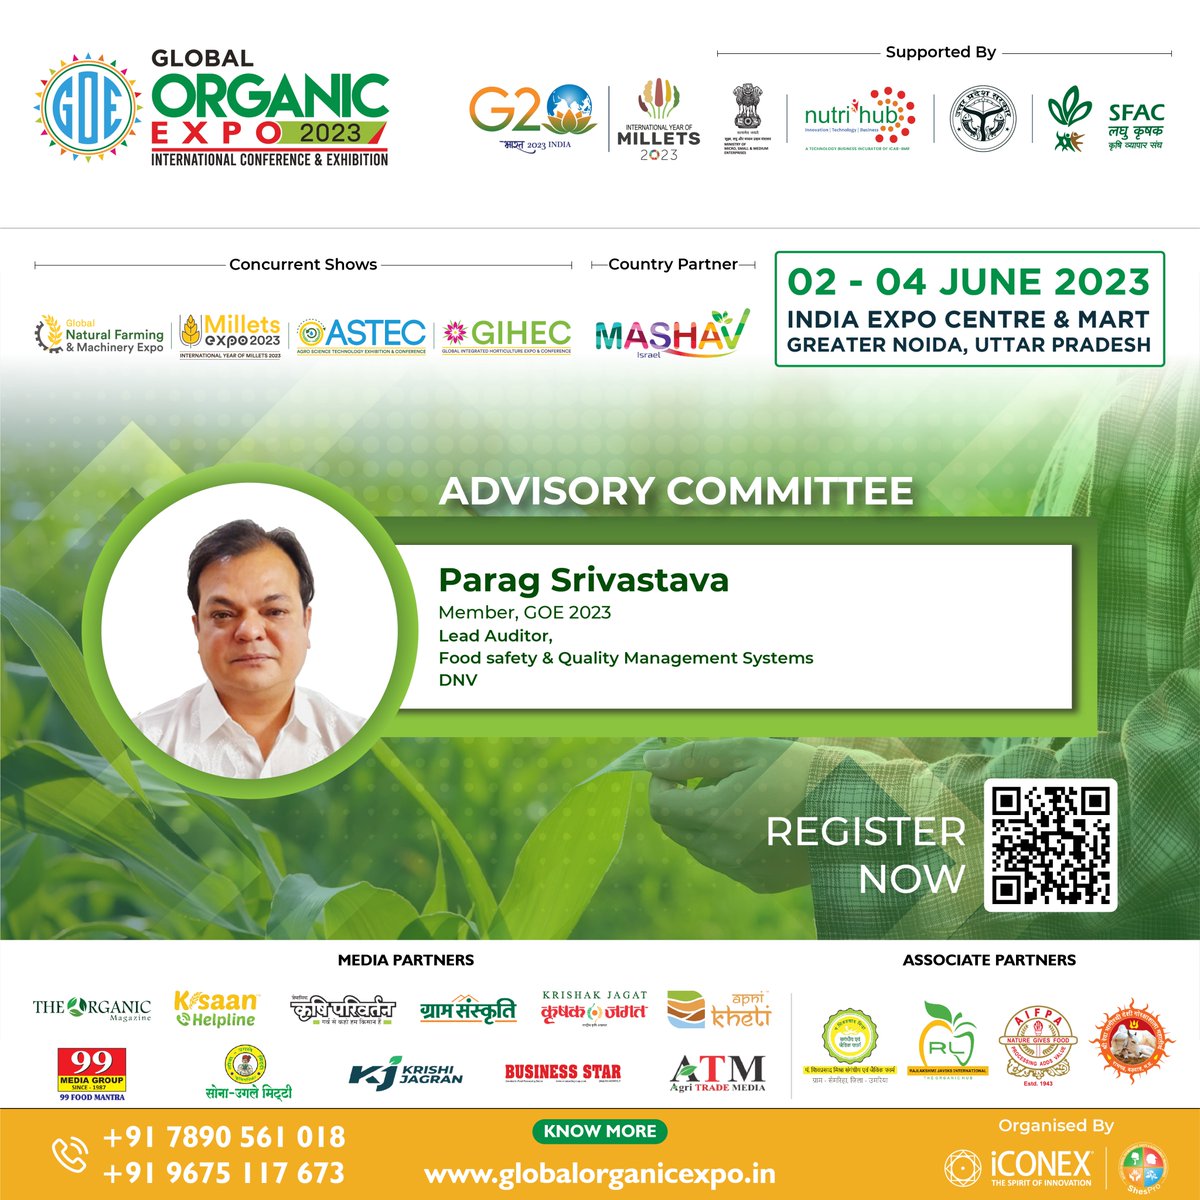 Global Organic Expo 2023 Welcomes Parag Srivastava, Lead Auditor, Food Safety & Quality Management Systems at DNV as a Advisory Committee Member of #GOE2023 Get More Information at globalorganicexpo.in #organic #organicfarming #AdvisoryCommittee #Millets #naturalfarming